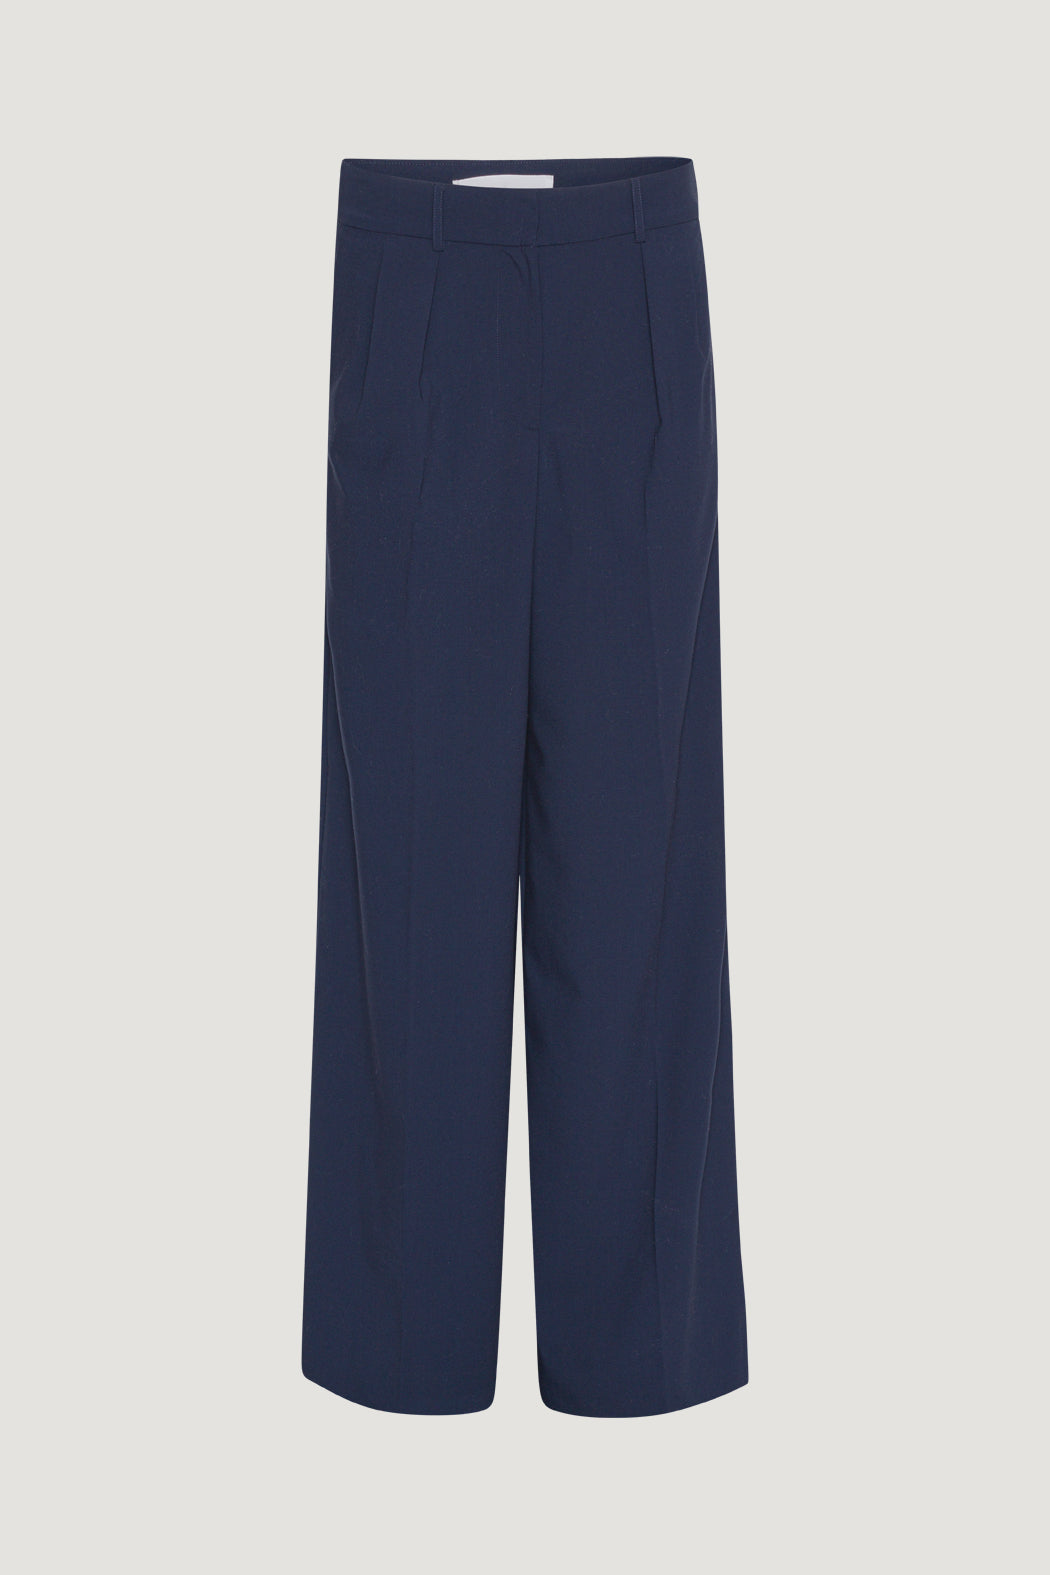 Remain Wide Suiting Pants